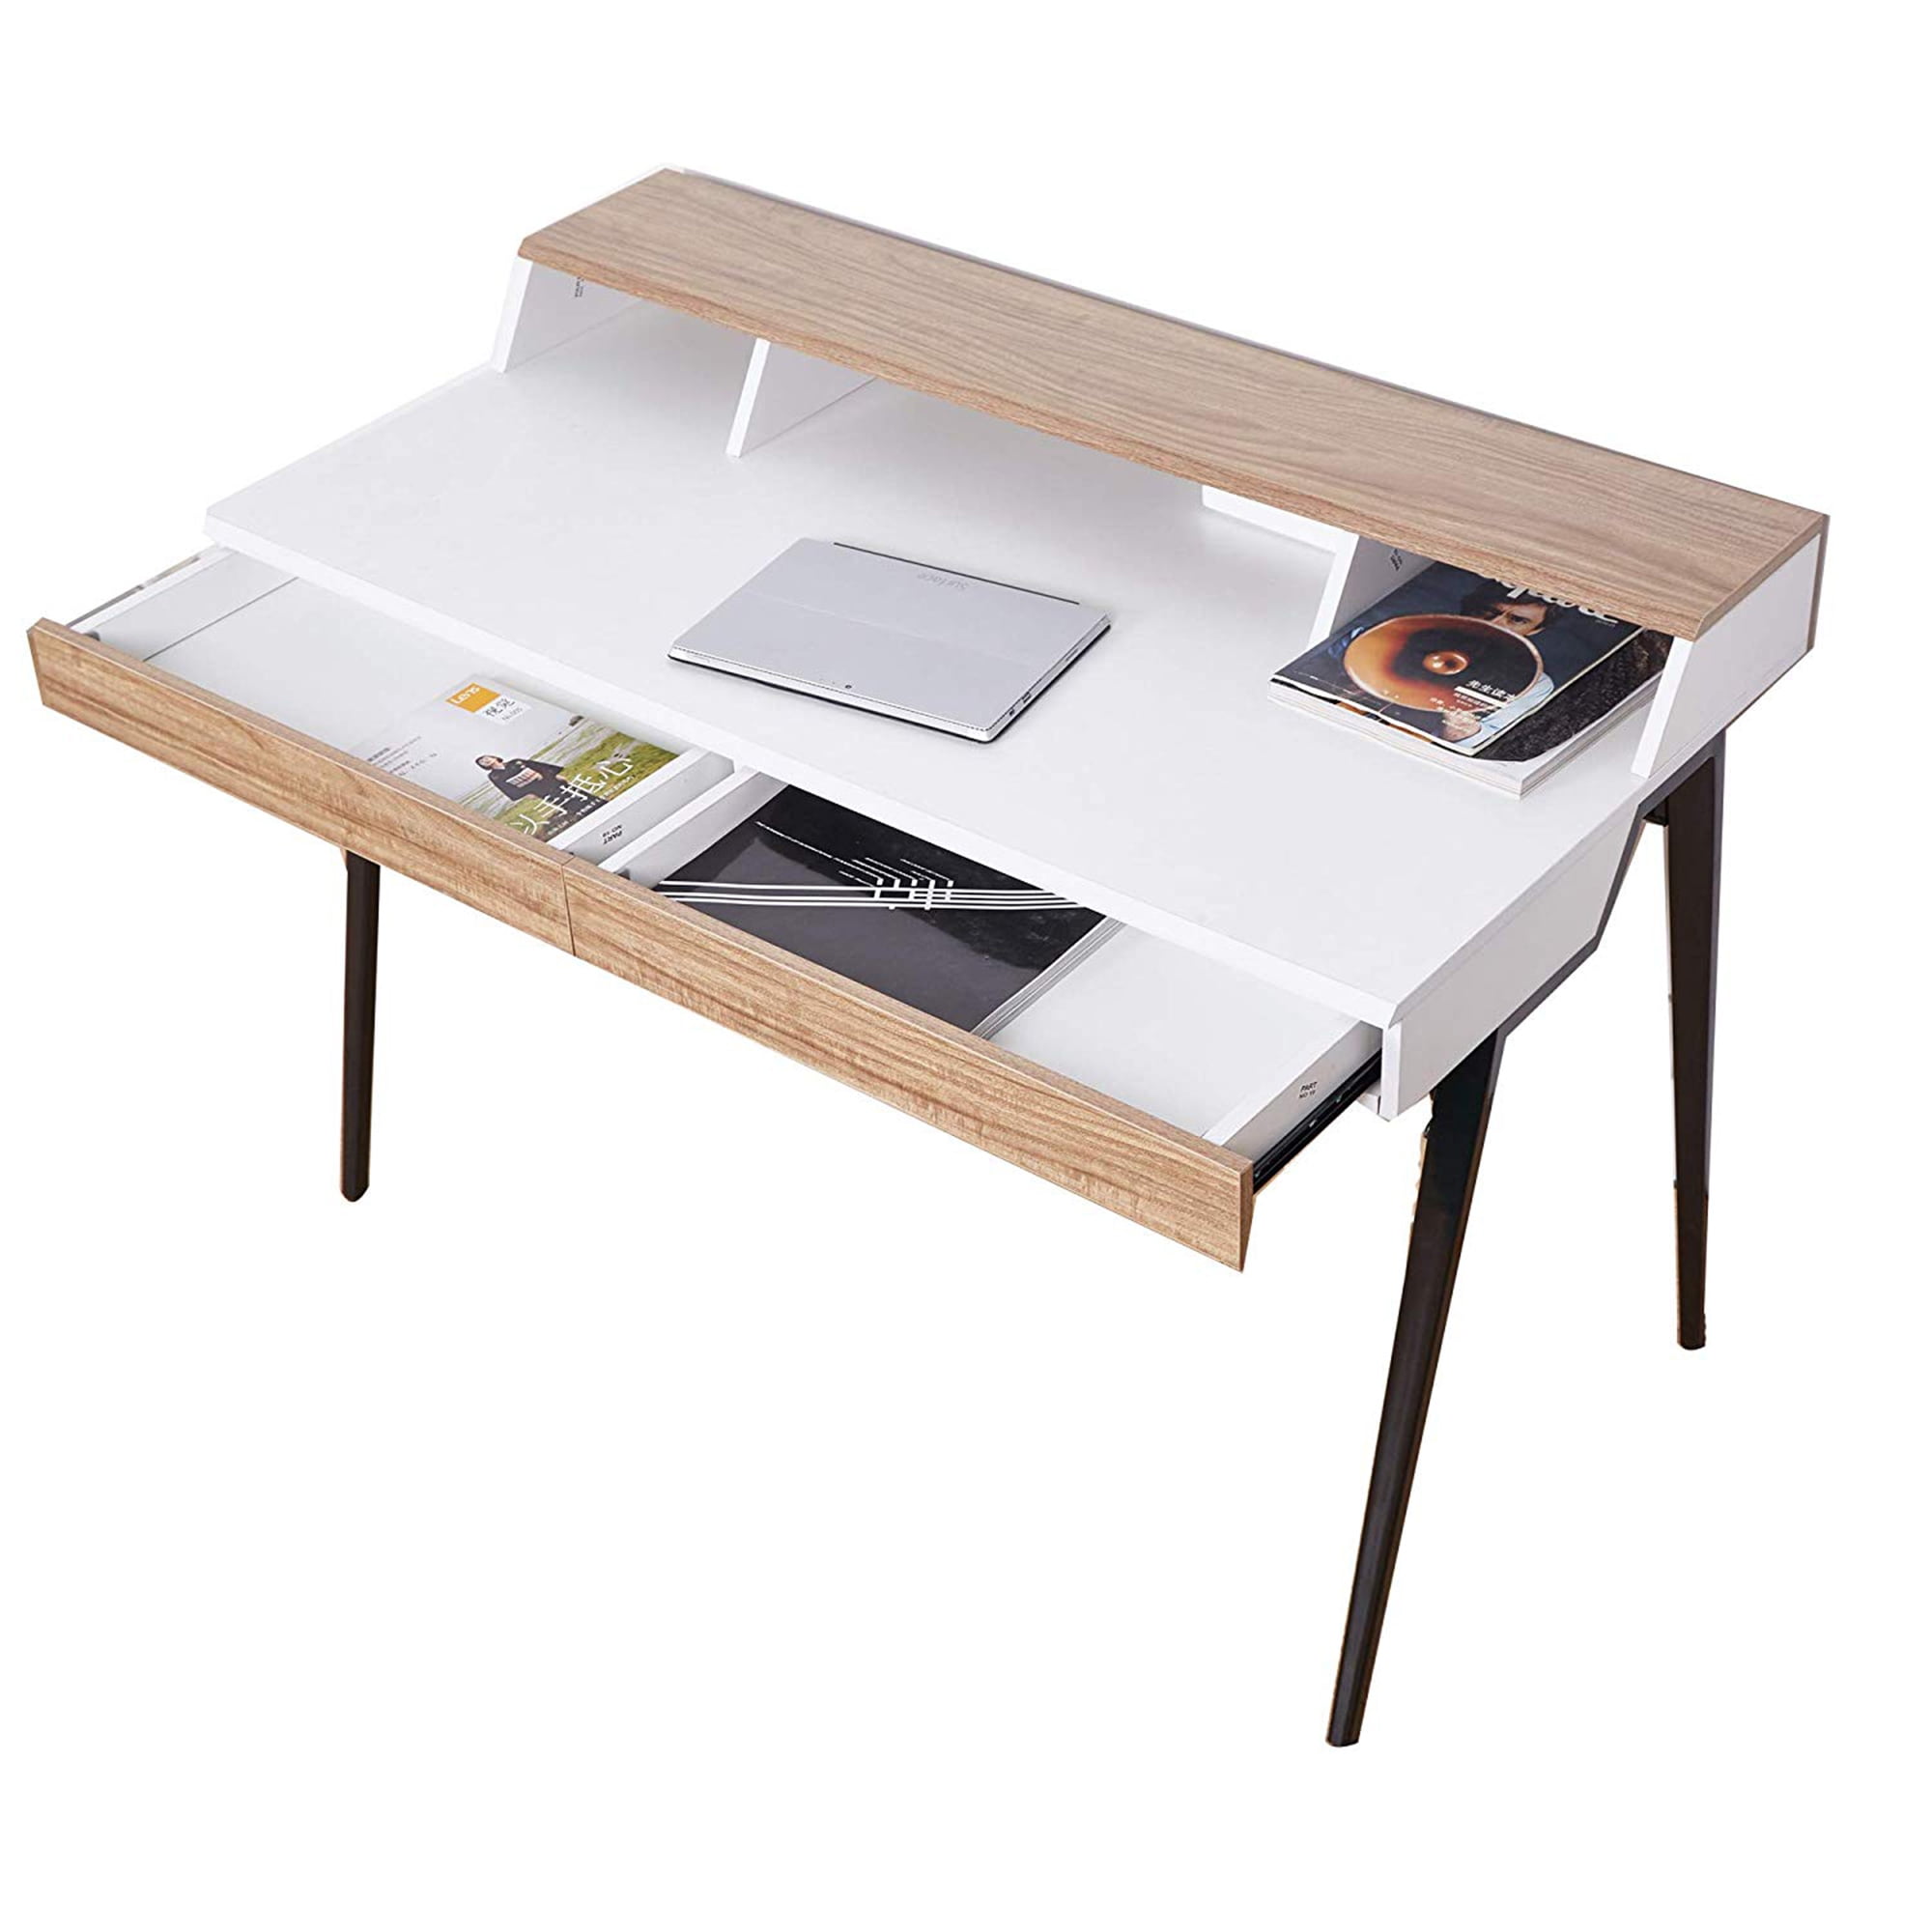 Dropship Solid Wood Computer Desk - 47'' Large Size Office Desk With 2  Drawers, Modern Simple Style PC Table With Gap Design For Home Office, Work,  Student, Study, Makeup Workstation (Beech) to